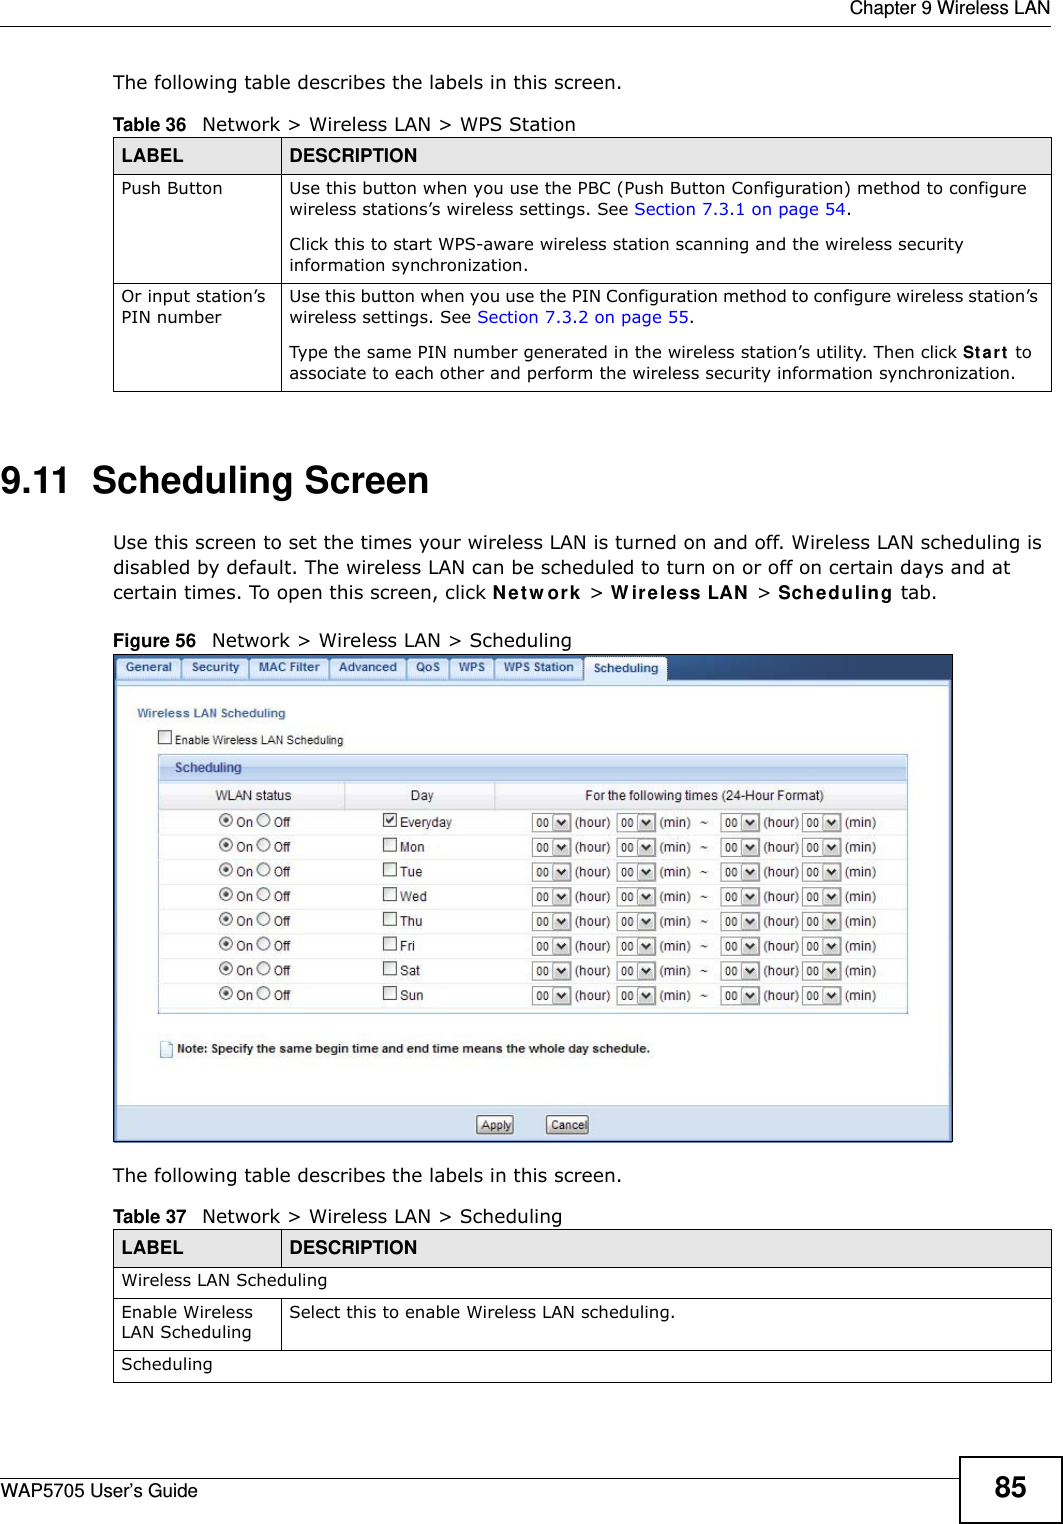  Chapter 9 Wireless LANWAP5705 User’s Guide 85The following table describes the labels in this screen.9.11  Scheduling Screen Use this screen to set the times your wireless LAN is turned on and off. Wireless LAN scheduling is disabled by default. The wireless LAN can be scheduled to turn on or off on certain days and at certain times. To open this screen, click N e t w or k  &gt; W irele ss LAN  &gt; Scheduling tab.Figure 56   Network &gt; Wireless LAN &gt; SchedulingThe following table describes the labels in this screen.Table 36   Network &gt; Wireless LAN &gt; WPS StationLABEL DESCRIPTIONPush Button Use this button when you use the PBC (Push Button Configuration) method to configure wireless stations’s wireless settings. See Section 7.3.1 on page 54.Click this to start WPS-aware wireless station scanning and the wireless security information synchronization. Or input station’s PIN numberUse this button when you use the PIN Configuration method to configure wireless station’s wireless settings. See Section 7.3.2 on page 55.Type the same PIN number generated in the wireless station’s utility. Then click St a r t  to associate to each other and perform the wireless security information synchronization. Table 37   Network &gt; Wireless LAN &gt; SchedulingLABEL DESCRIPTIONWireless LAN SchedulingEnable Wireless LAN SchedulingSelect this to enable Wireless LAN scheduling.Scheduling